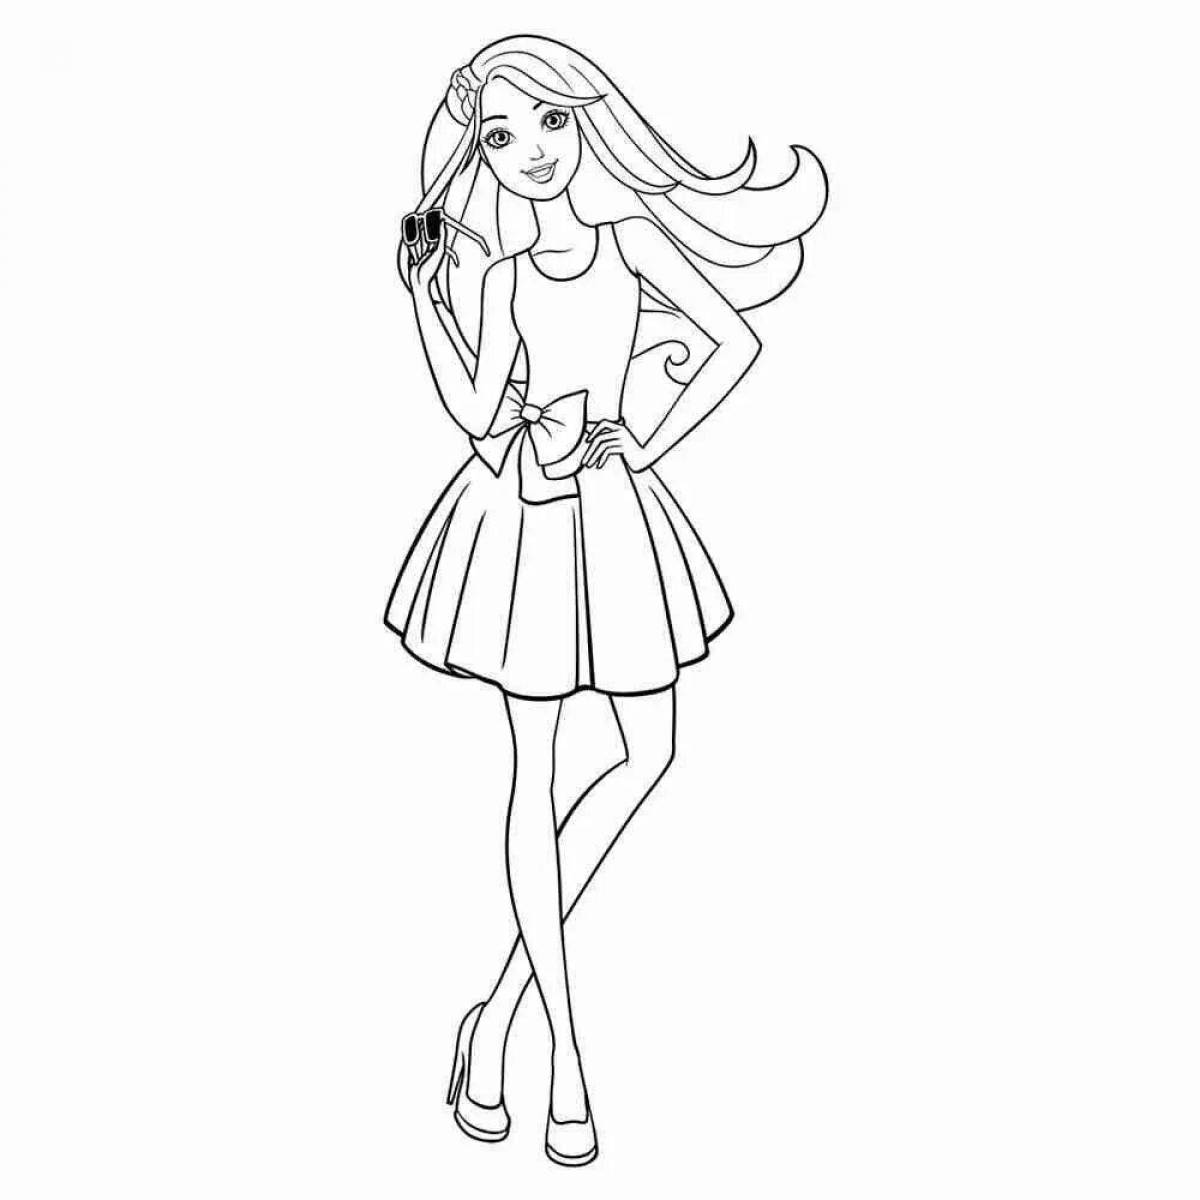 Amazing coloring page with barbie projector